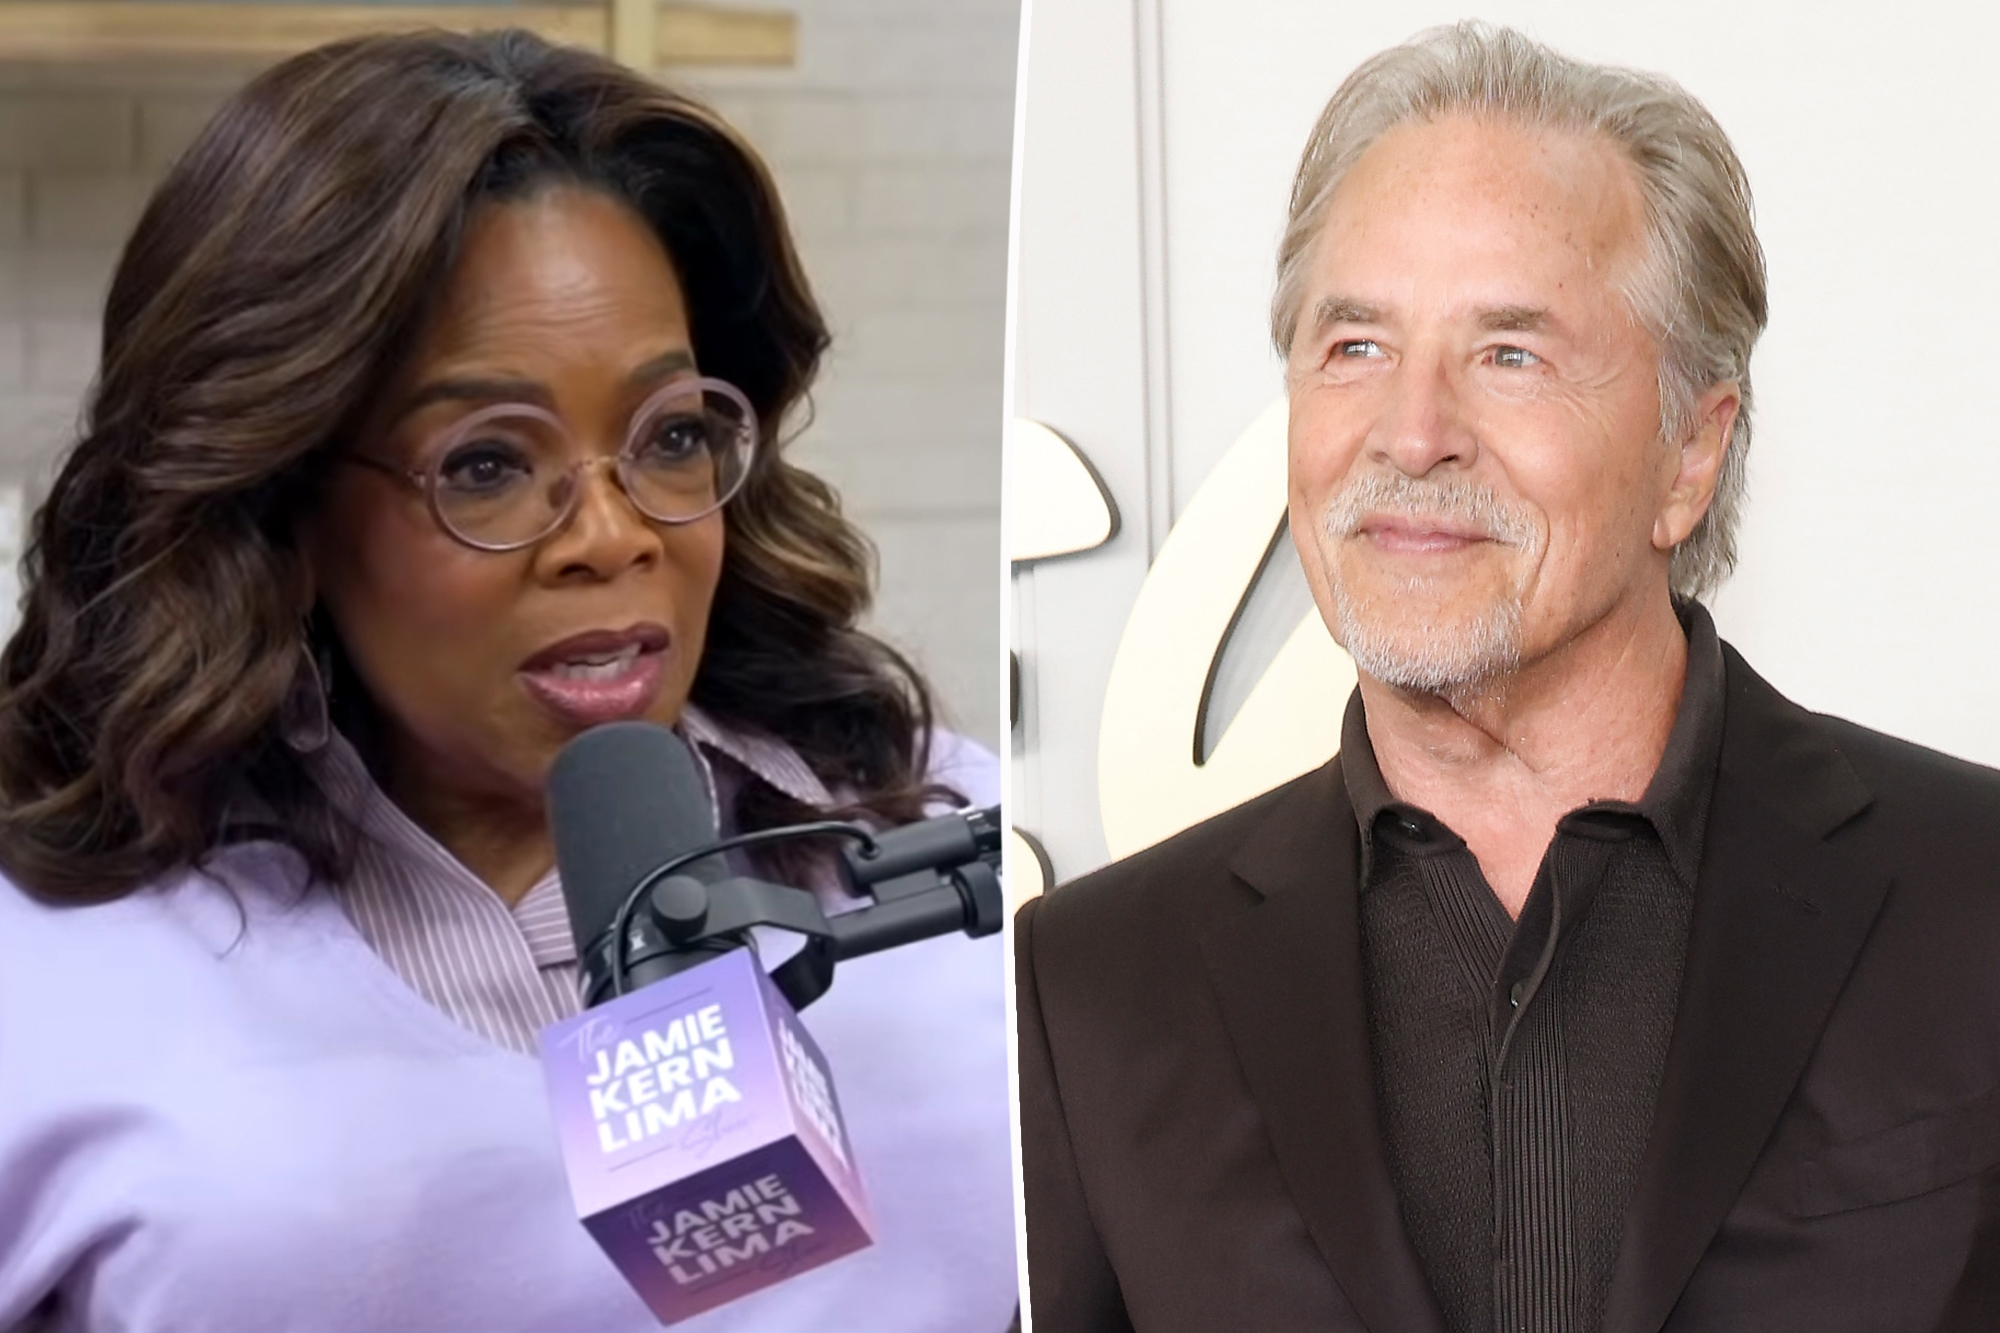 Oprah Winfrey's Candid Confession: Battling Body Image and Self-Judgment